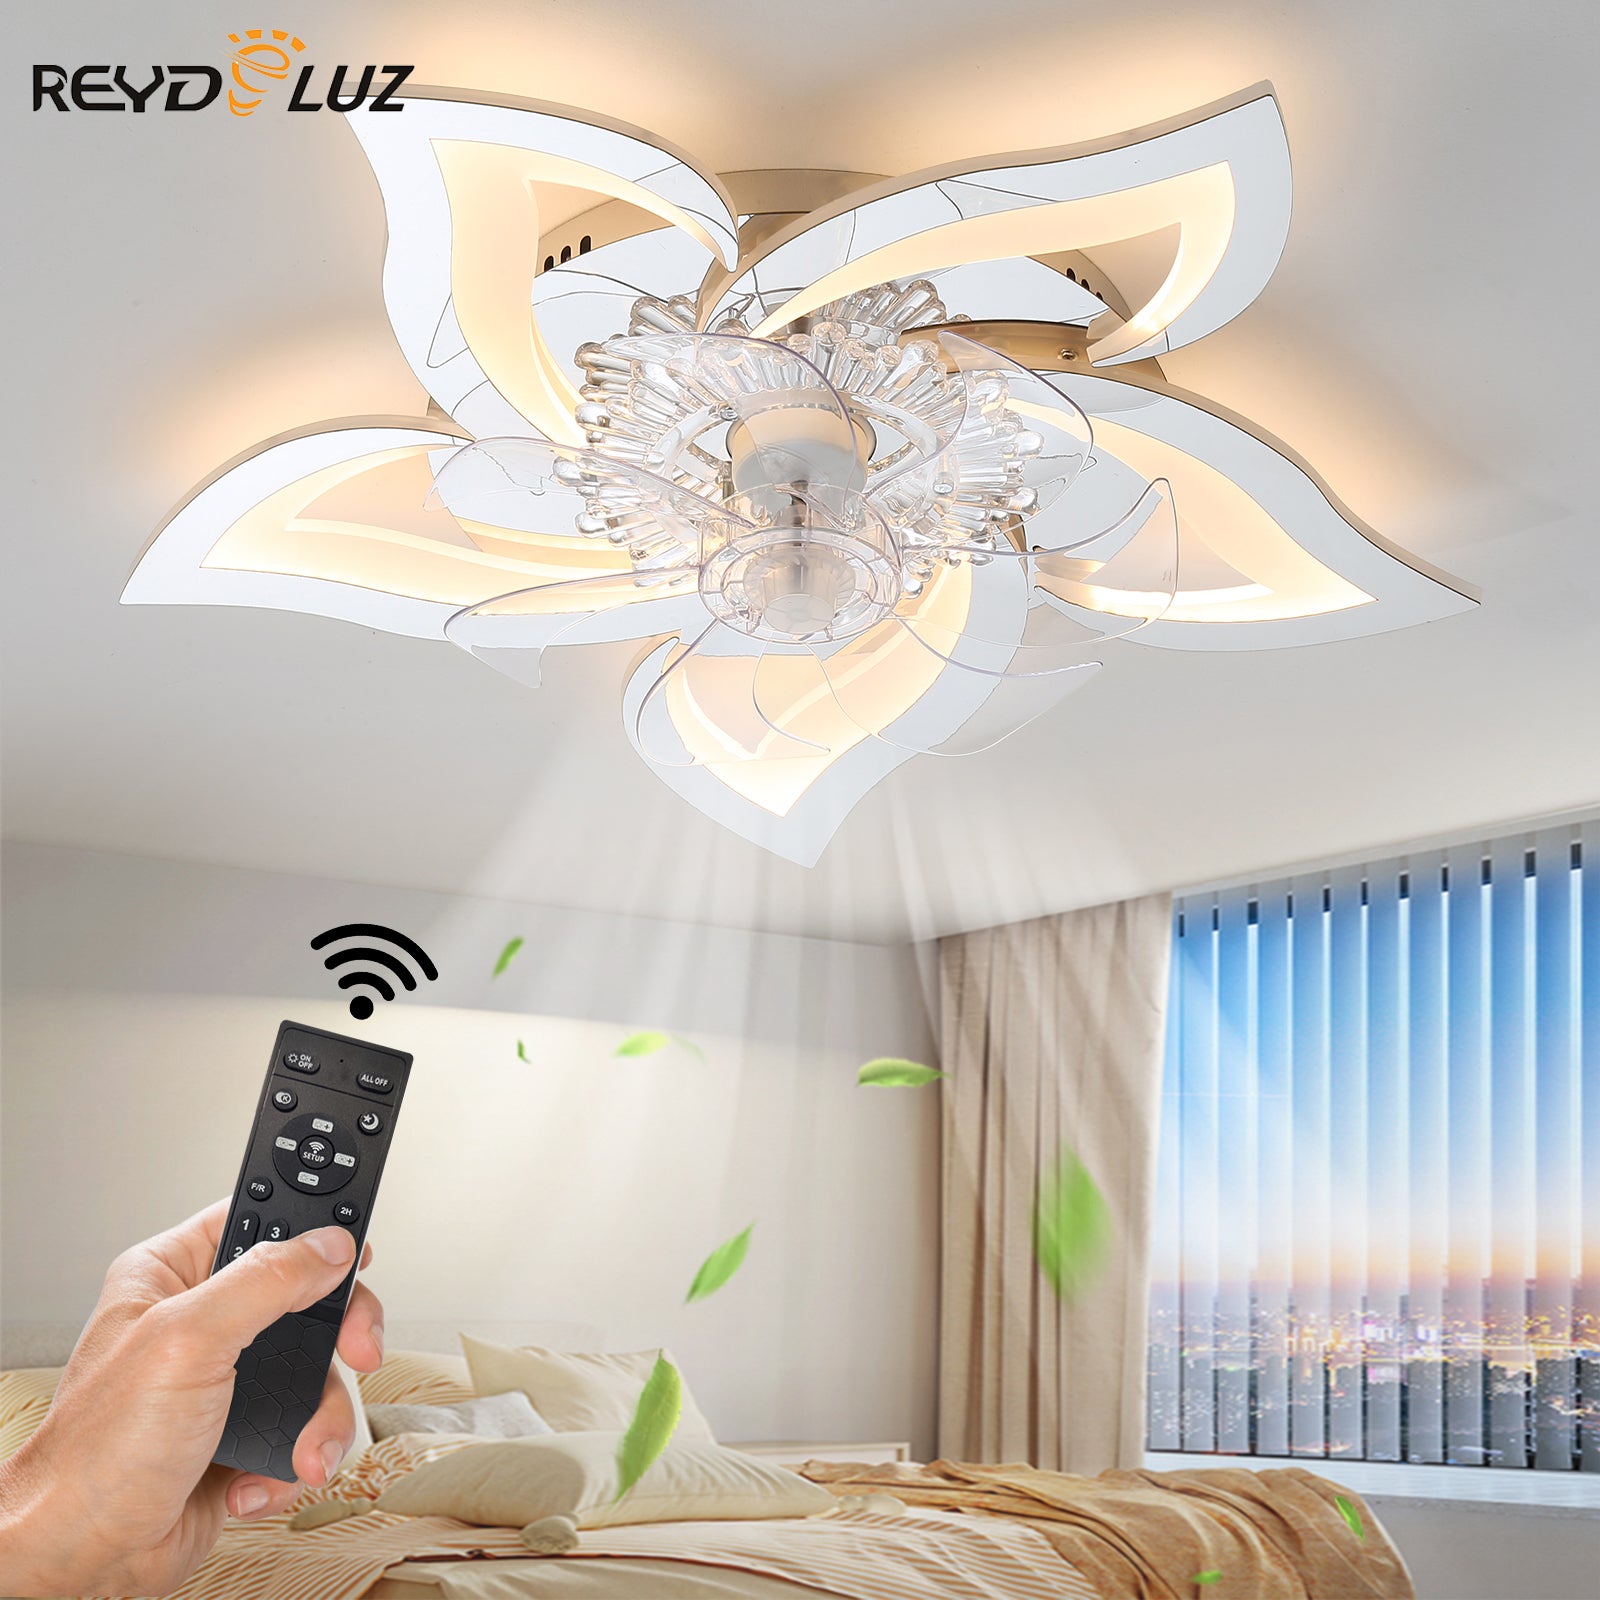 REYDELUZ Low Profile Ceiling Fan with Lights,Modern Dimmable Flower Shape Ceiling Light Fan with Remote Control/App Control,for Bedroom/Children's Room.